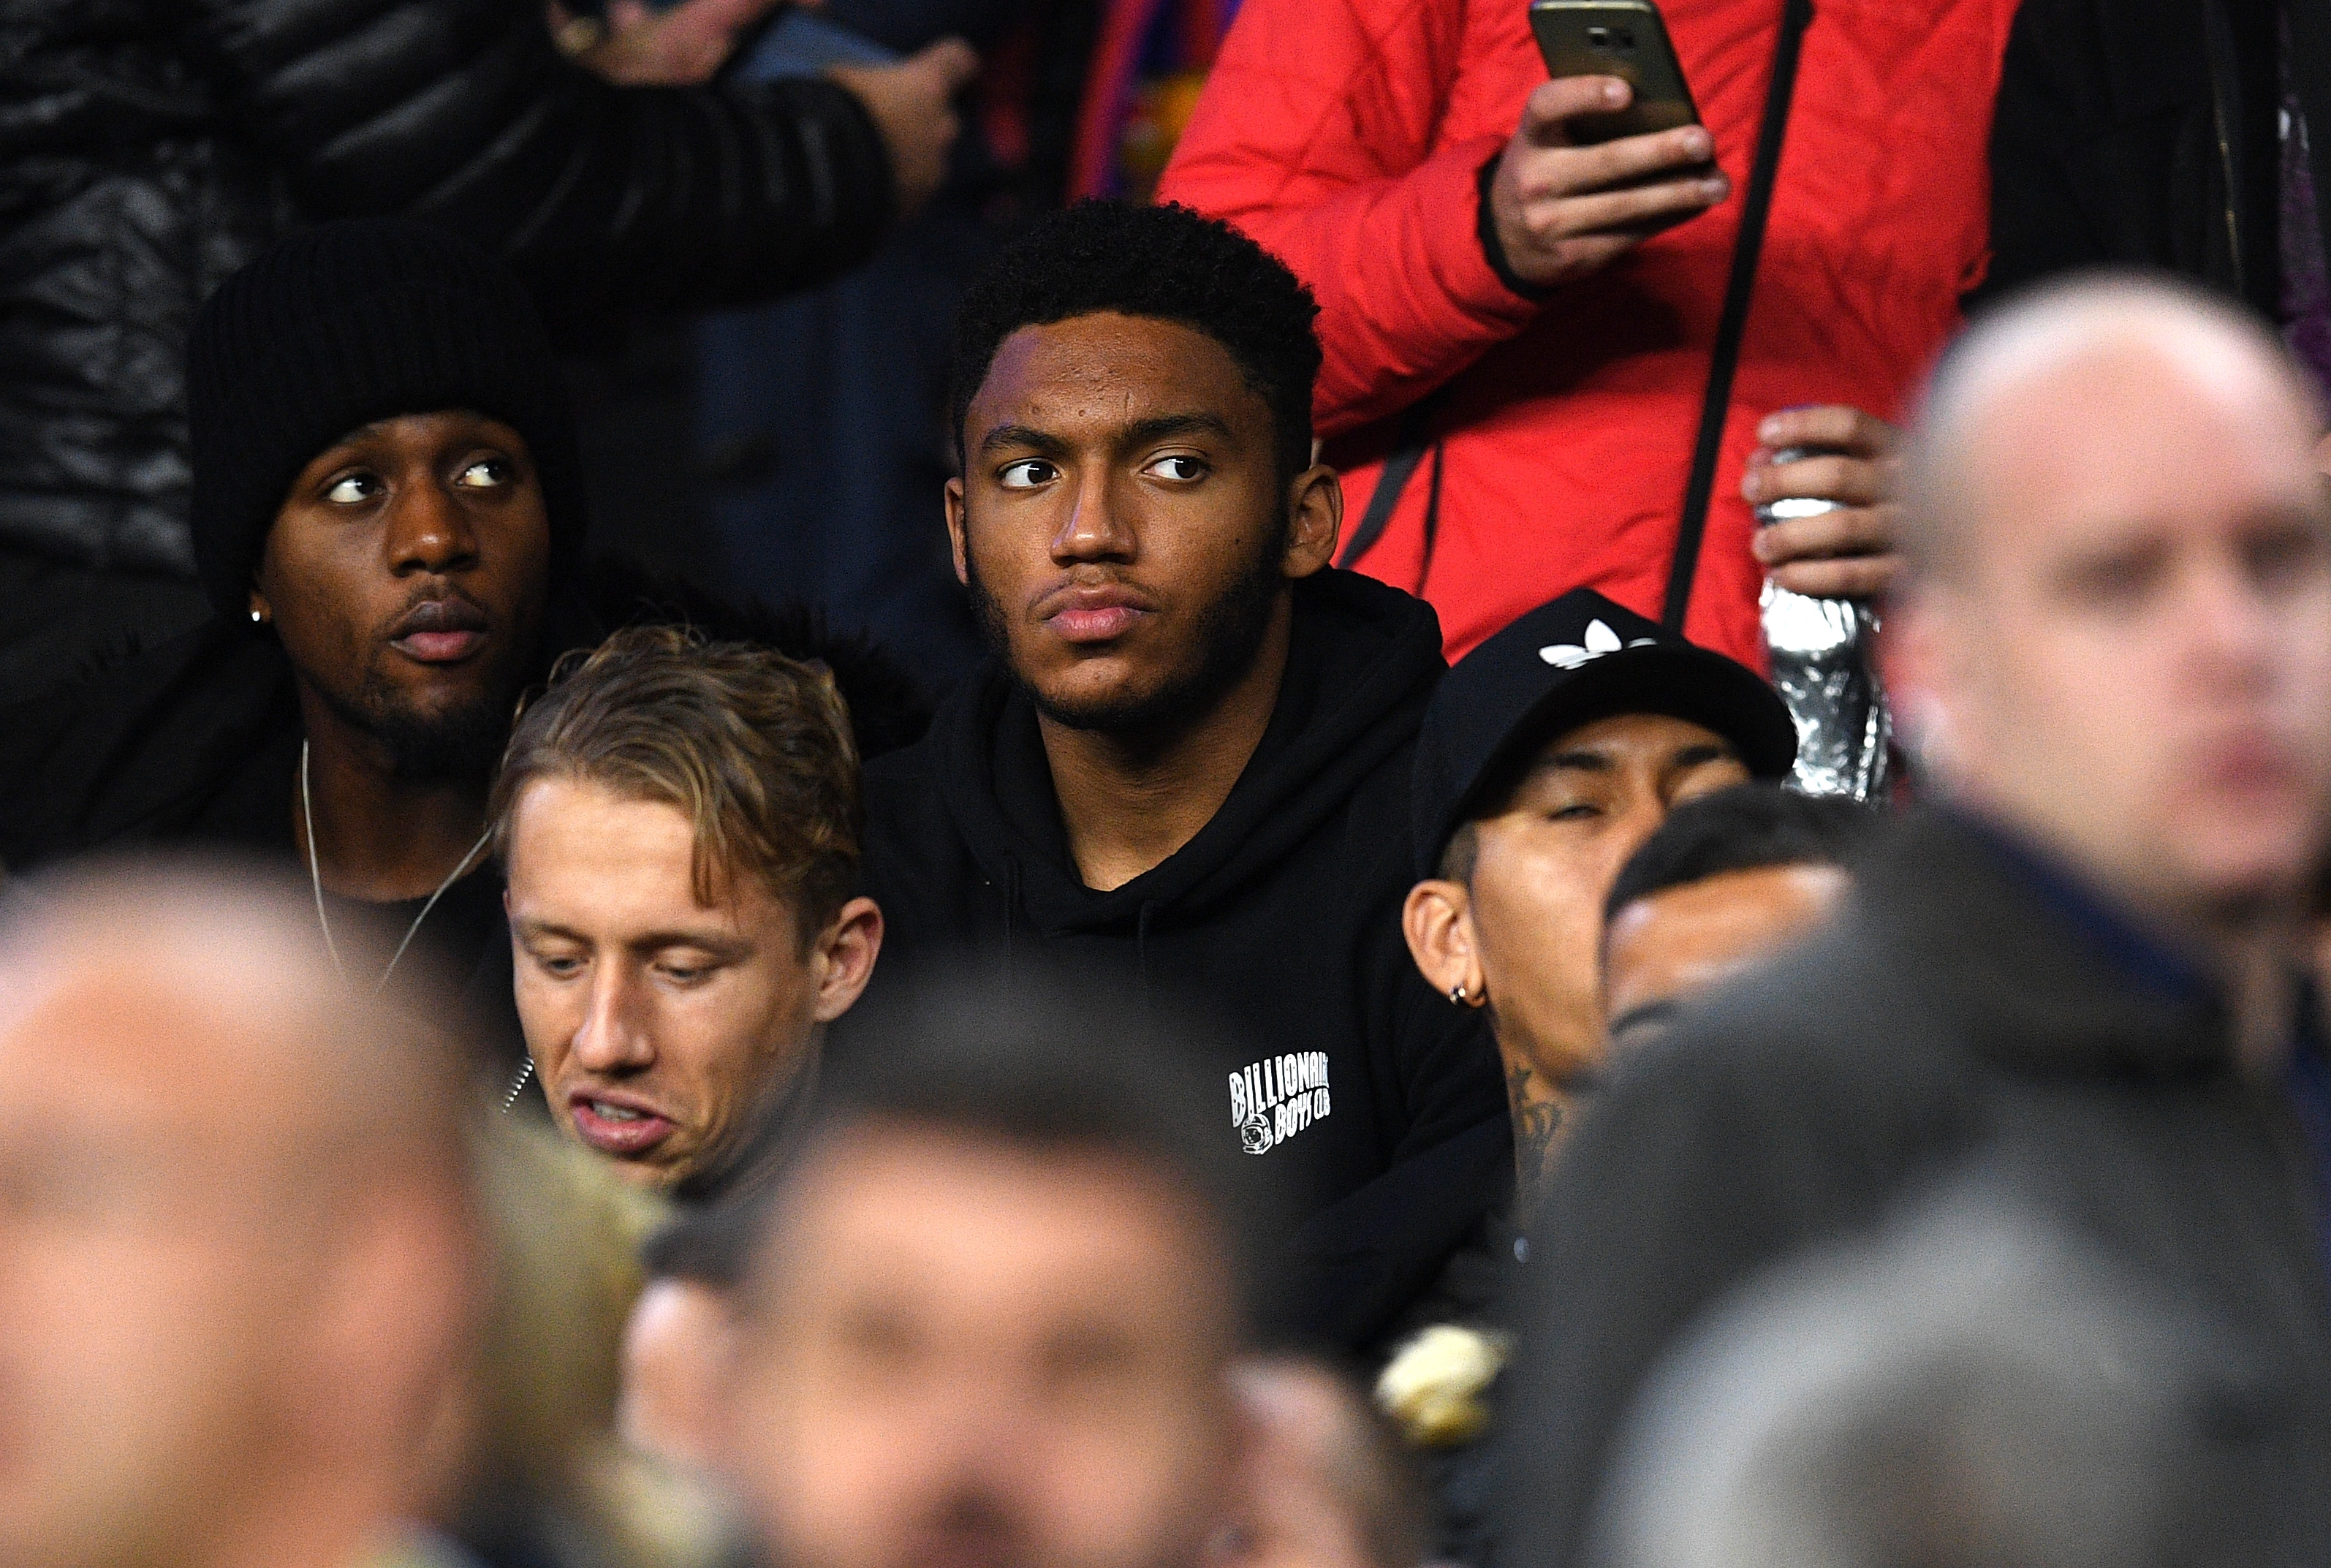 BARCELONA, SPAIN - DECEMBER 06: Joe Gomez of Liverpool (C) looks on from the stands during the UEFA Champions League Group C match between FC Barcelona and VfL Borussia Moenchengladbach at Camp Nou on December 6, 2016 in Barcelona, .  (Photo by David Ramos/Getty Images)